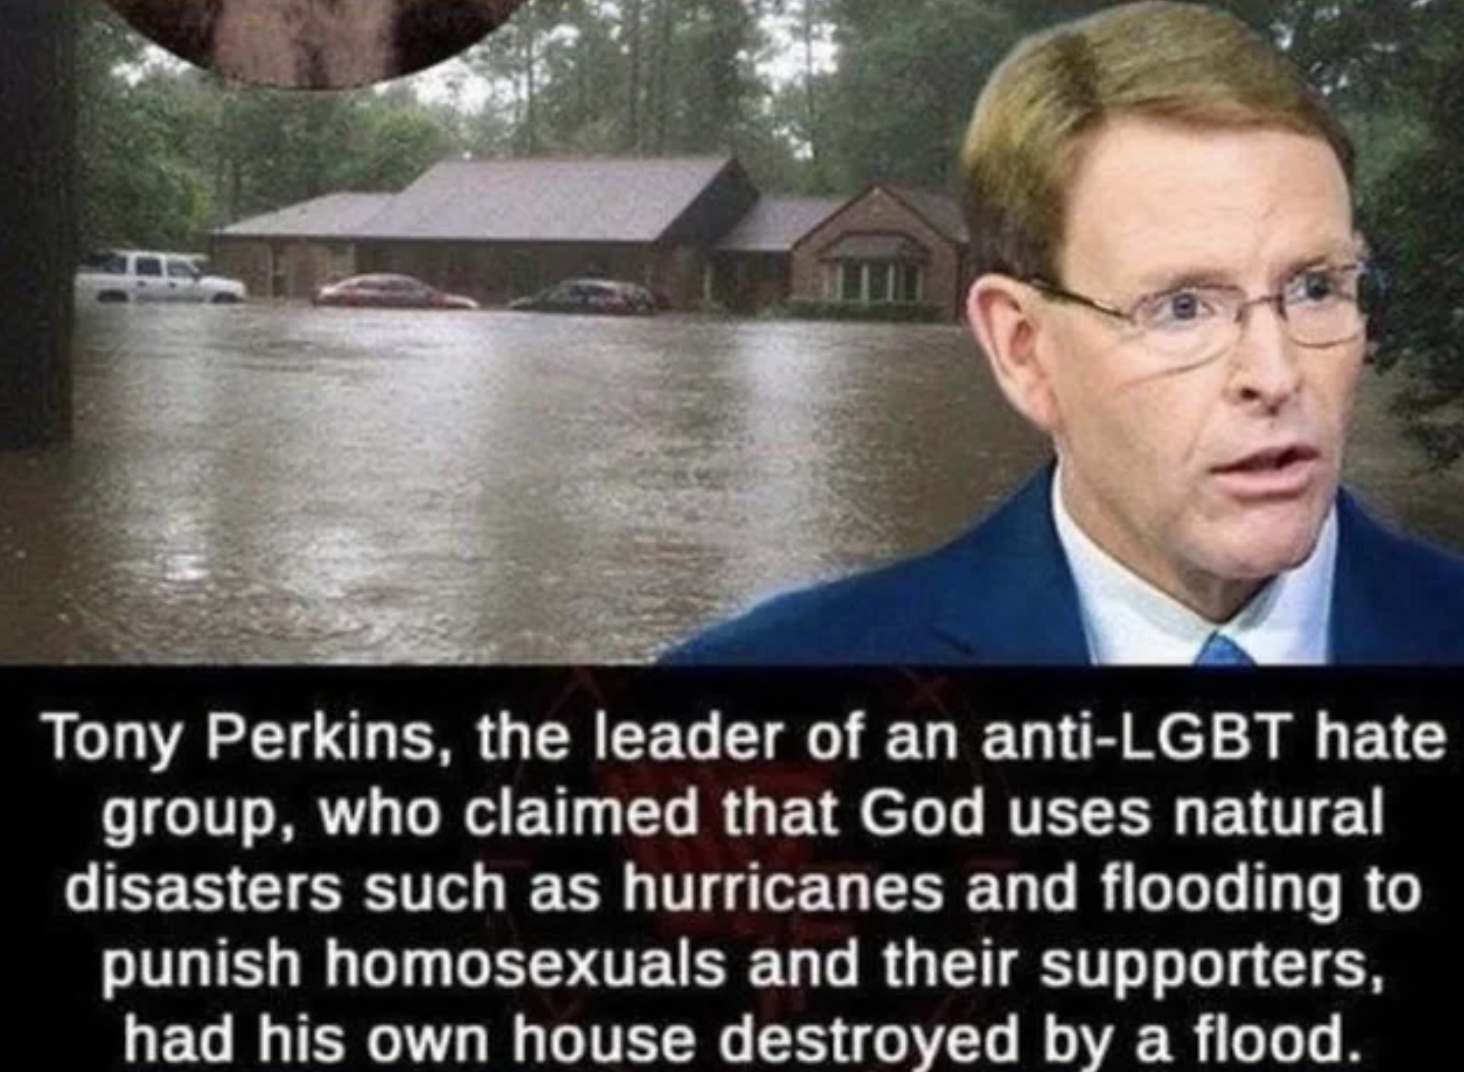 Funny Facepalms - the leader of an antiLgbt hate group, who claimed that God uses natural disasters such as hurricanes and flooding to punish homosexuals and their supporters, had his own house destroyed by a flood.